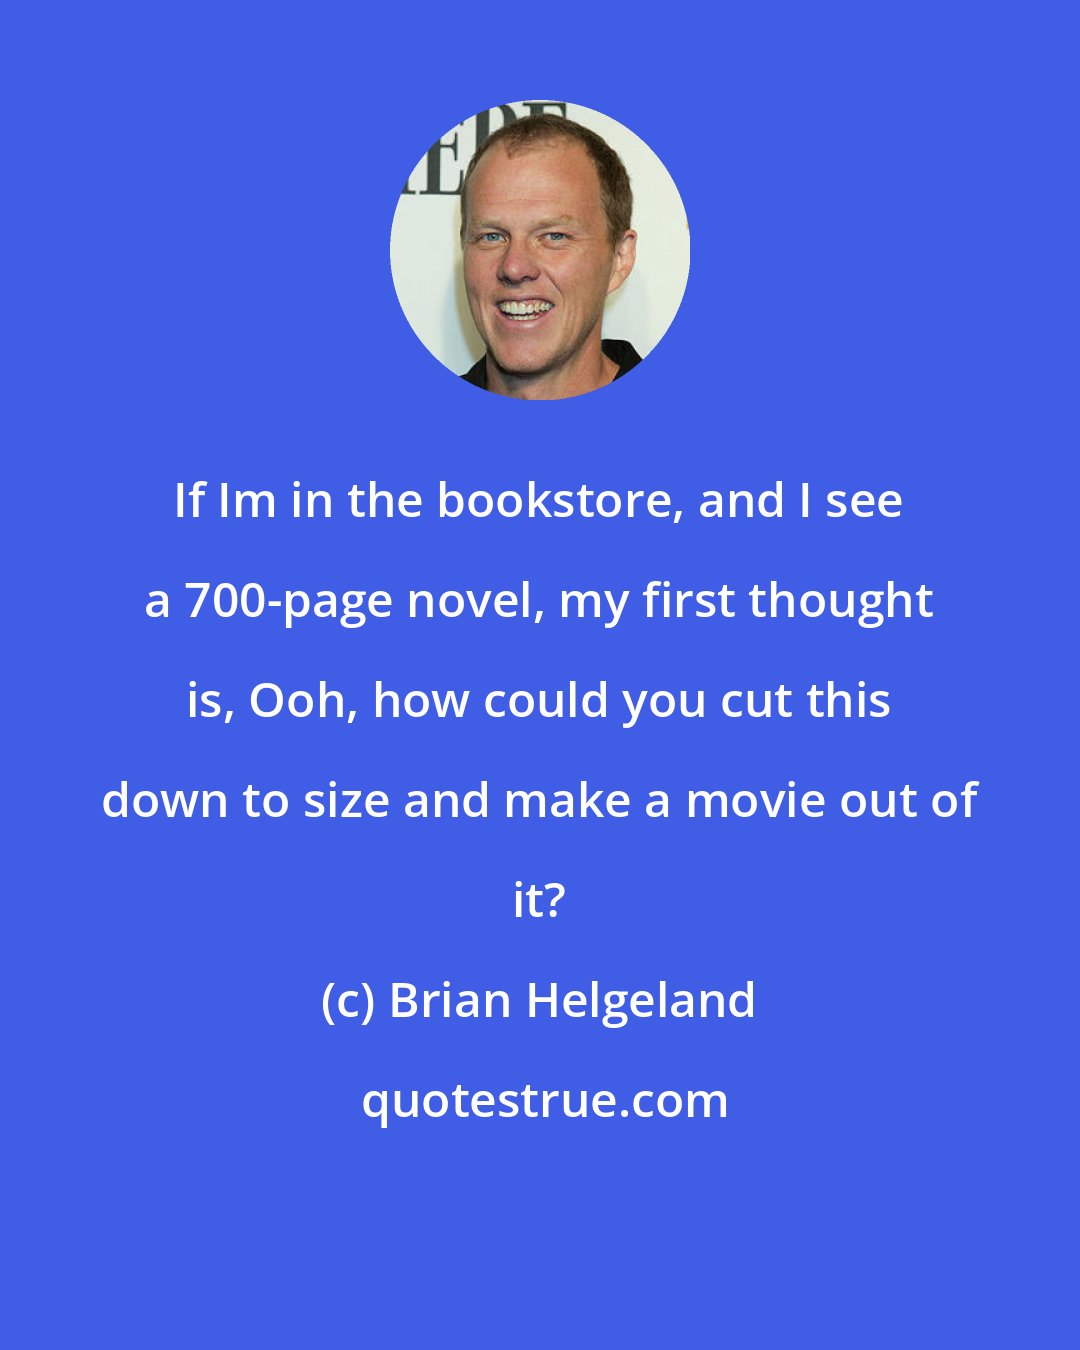 Brian Helgeland: If Im in the bookstore, and I see a 700-page novel, my first thought is, Ooh, how could you cut this down to size and make a movie out of it?